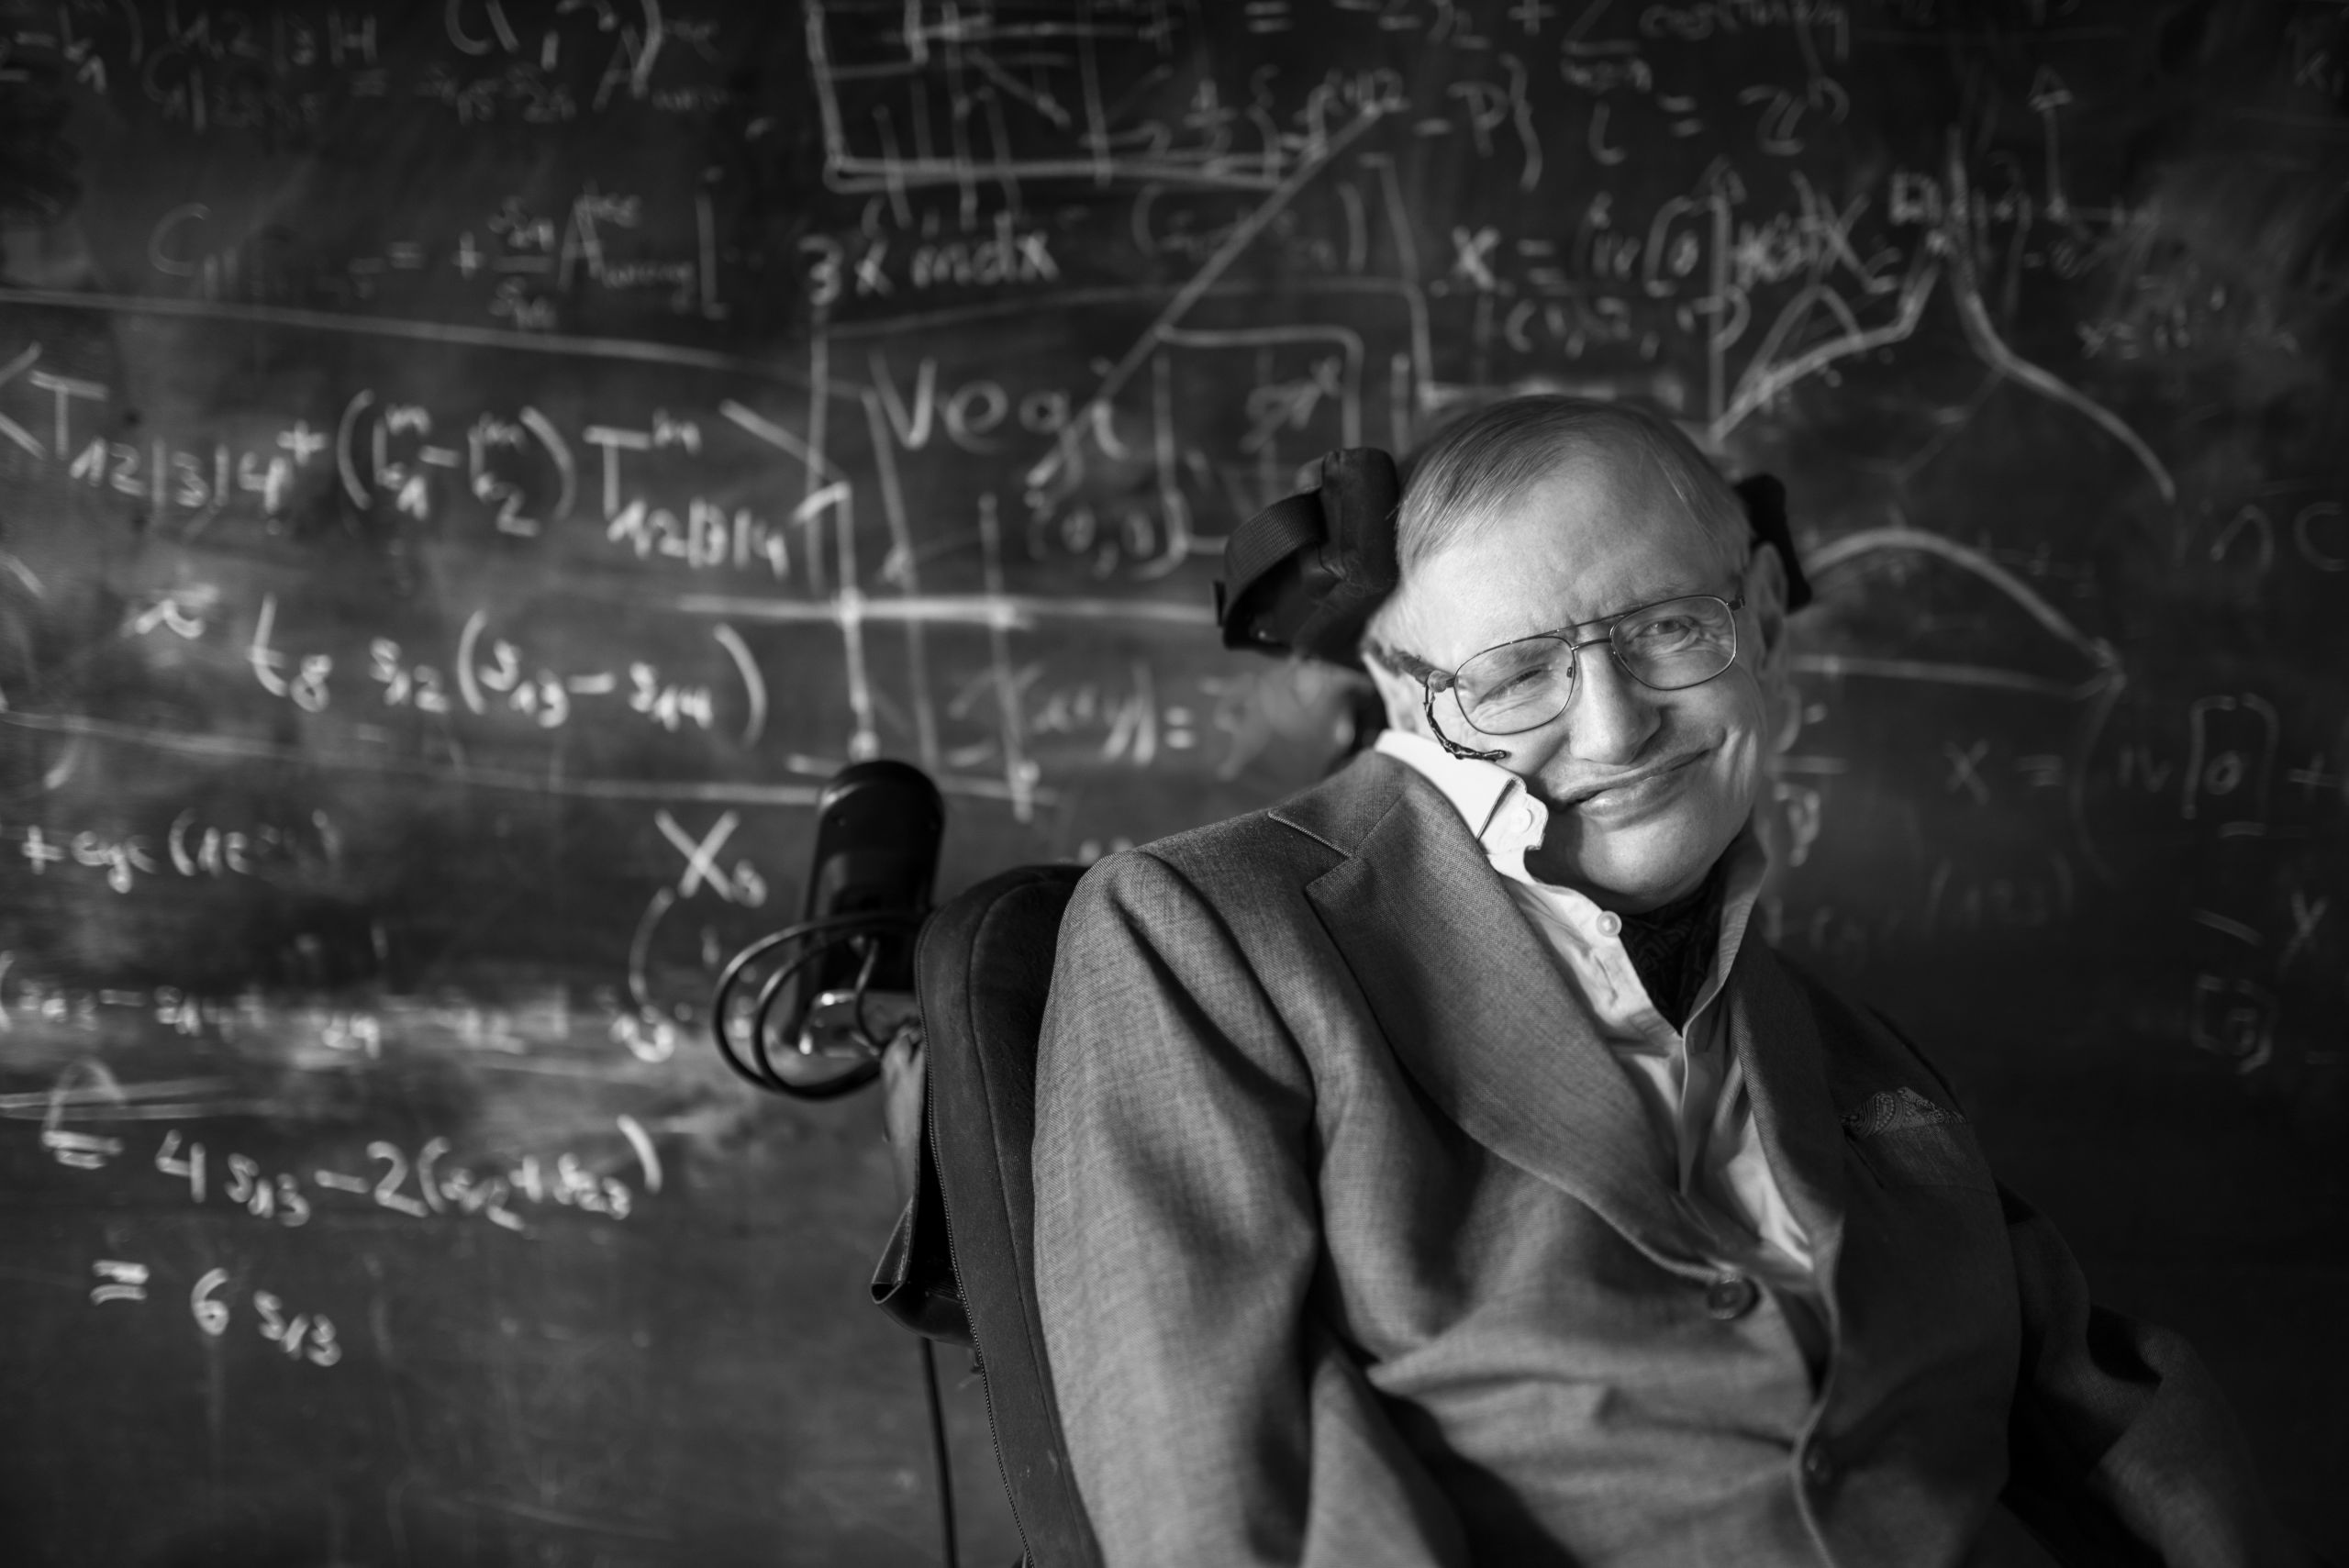 Stephen Hawking posing in front of chalk board. Photo courtesy of University of Cambridge.